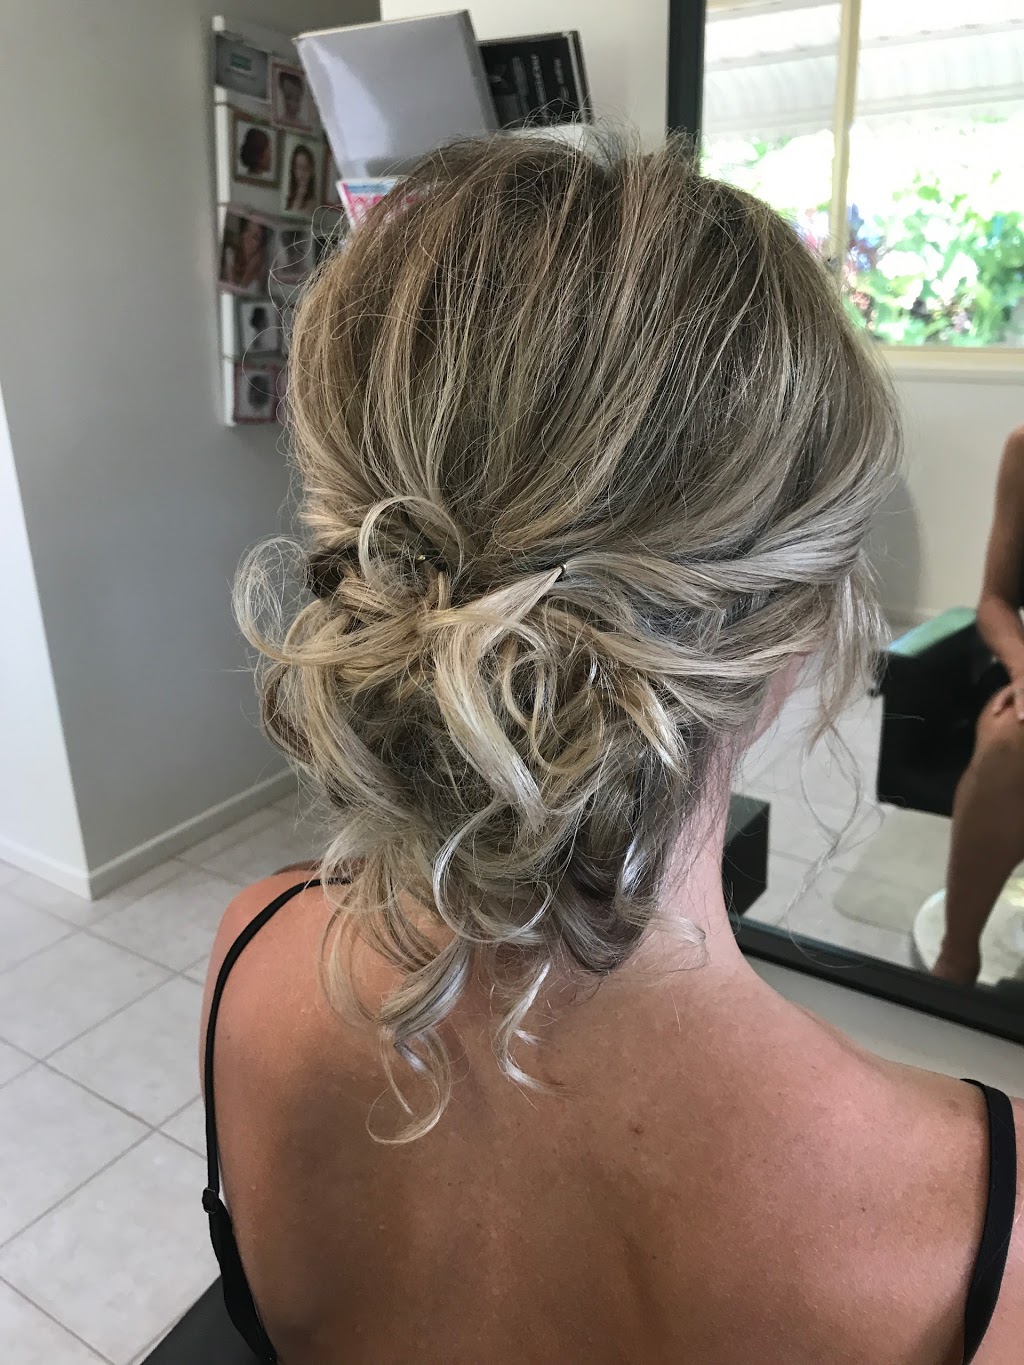 Noosa Hairdressers | hair care | 11 Moilow Ct, Tewantin QLD 4565, Australia | 0488776267 OR +61 488 776 267